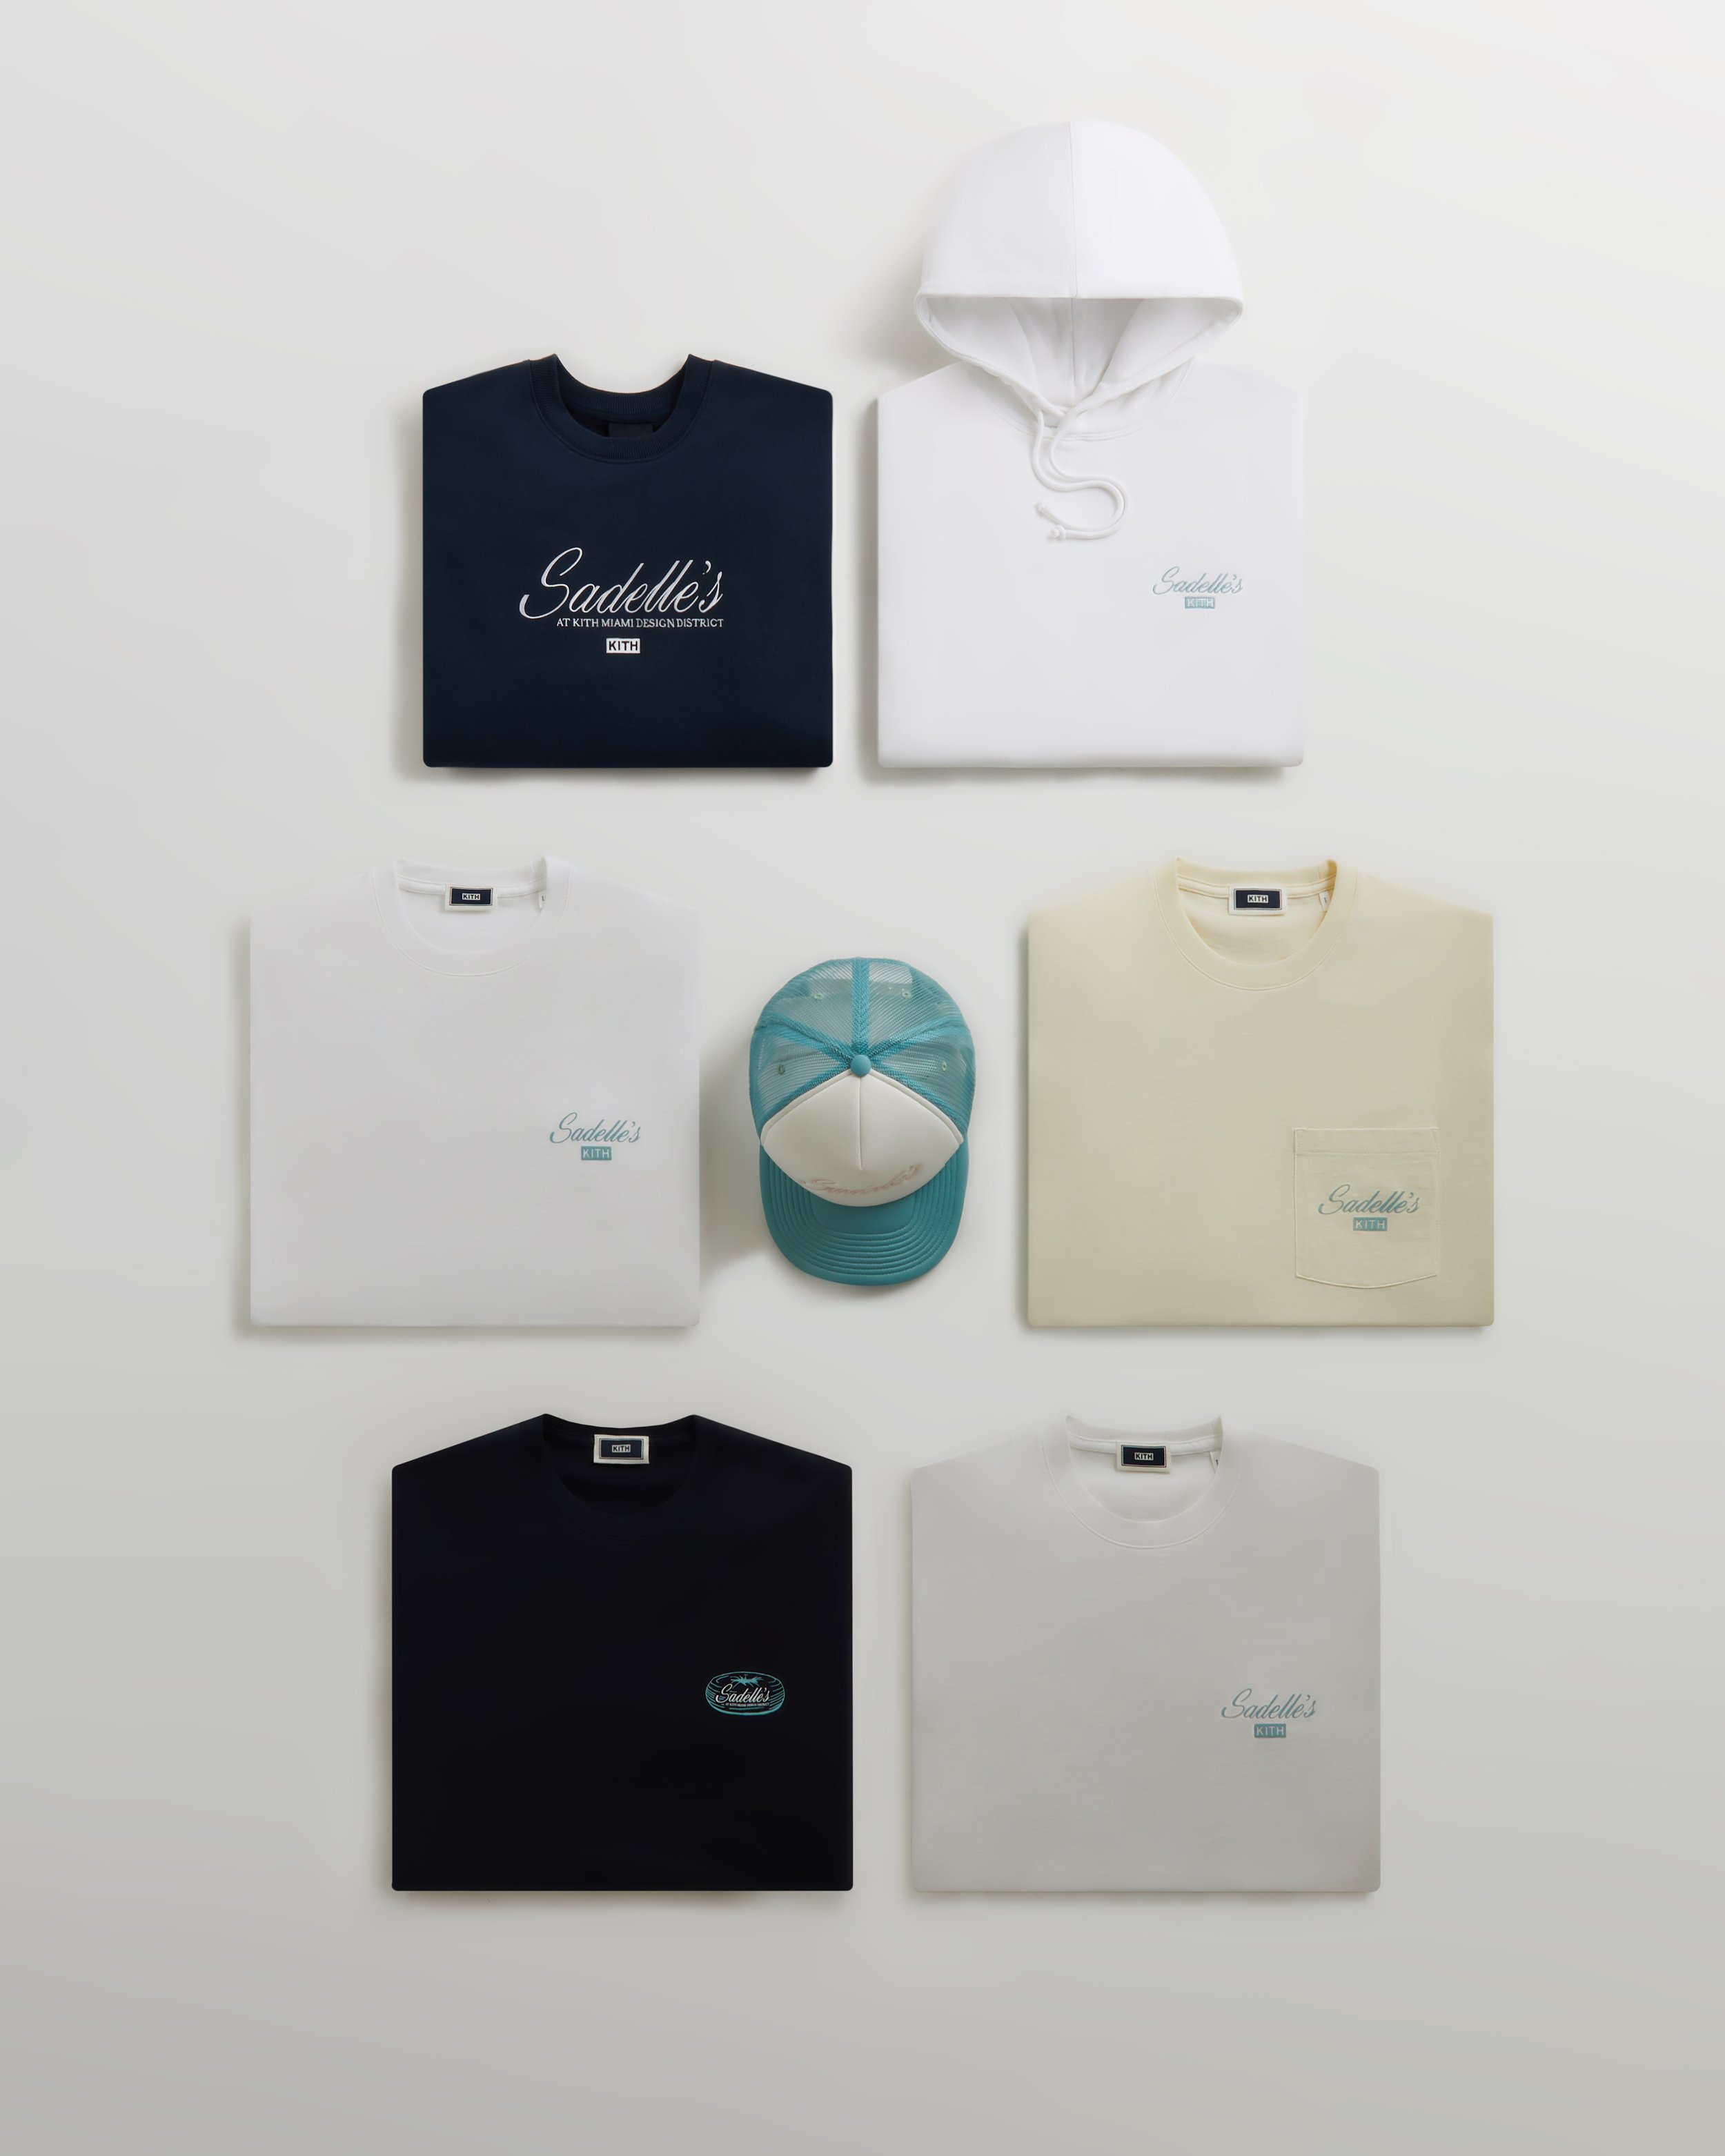 Sadelle's X Kith Capsule Collection